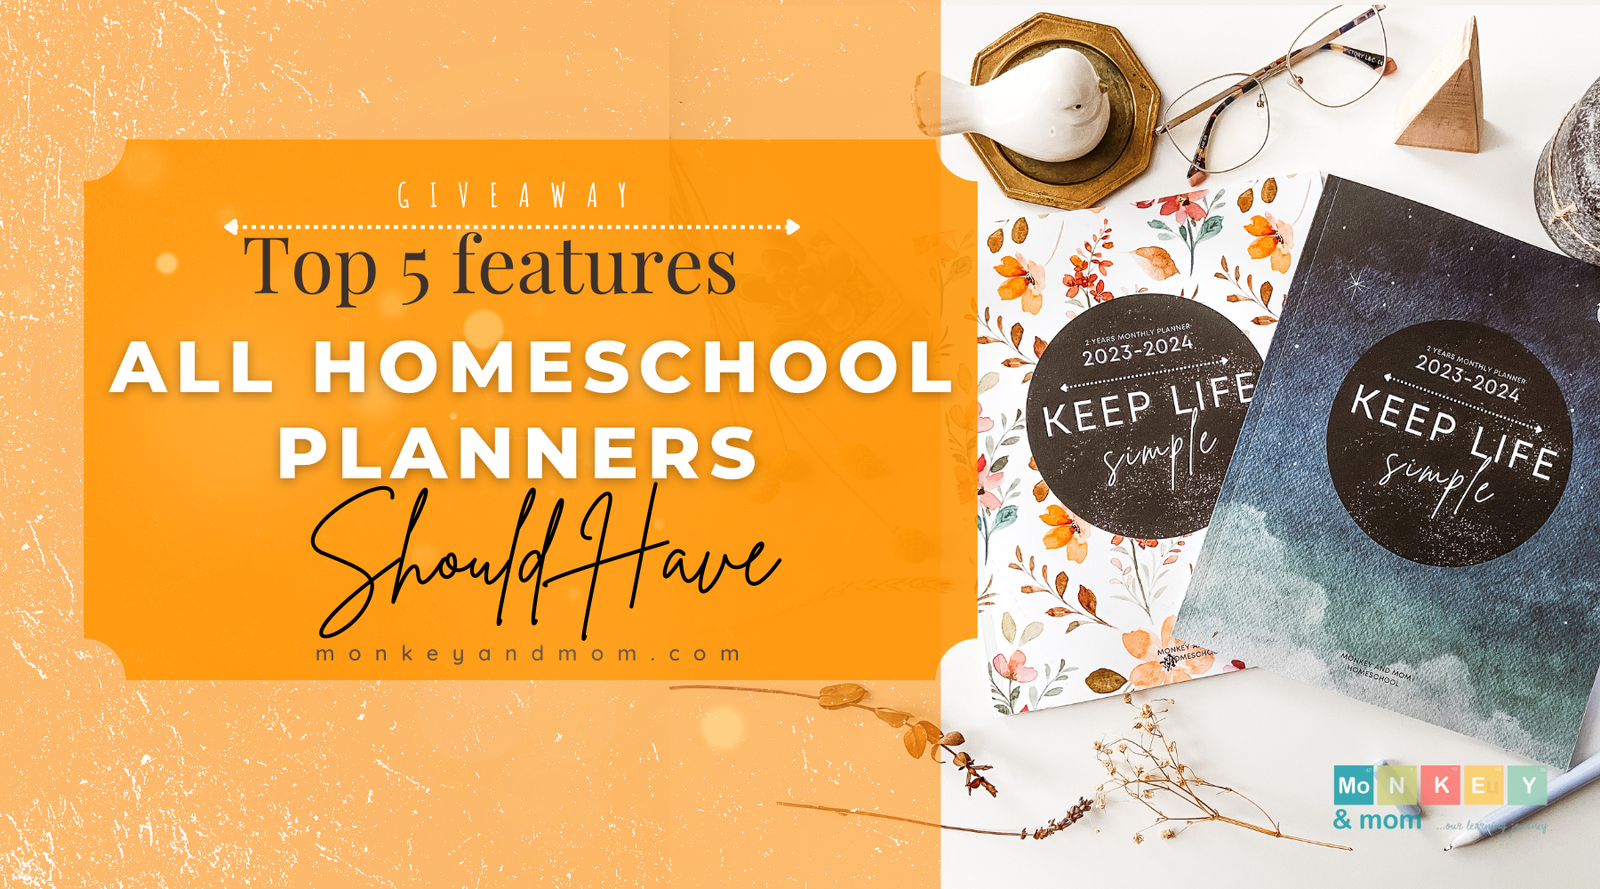 The 5 Key Features A Homeschool Planner Should Have To Make Your Life Easier | Focused Planners